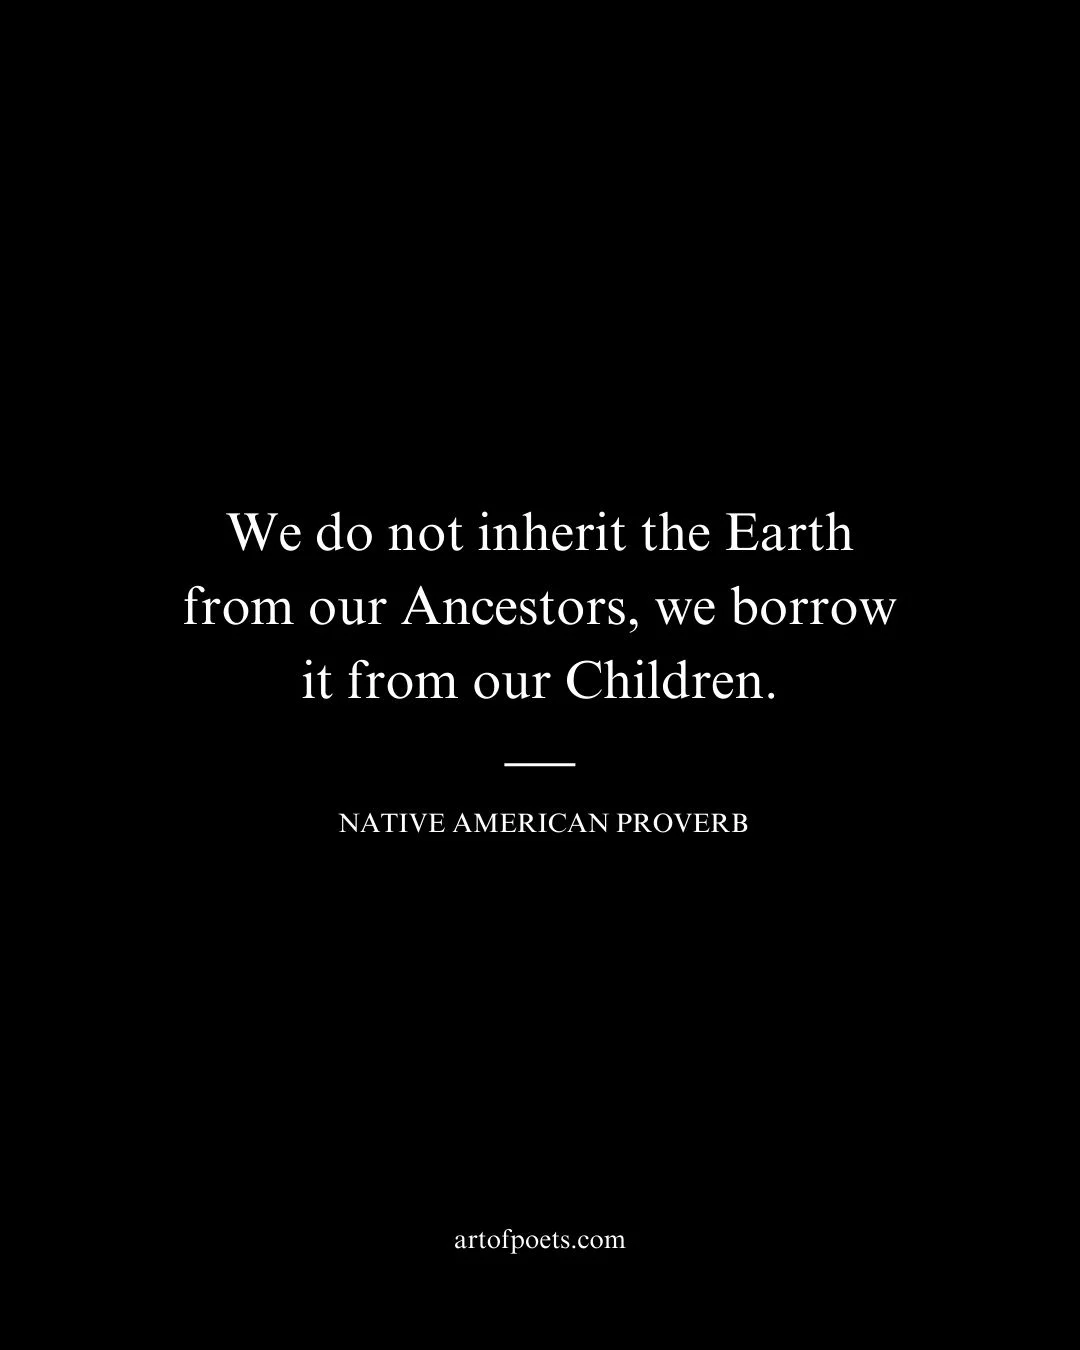 We do not inherit the Earth from our Ancestors we borrow it from our Children